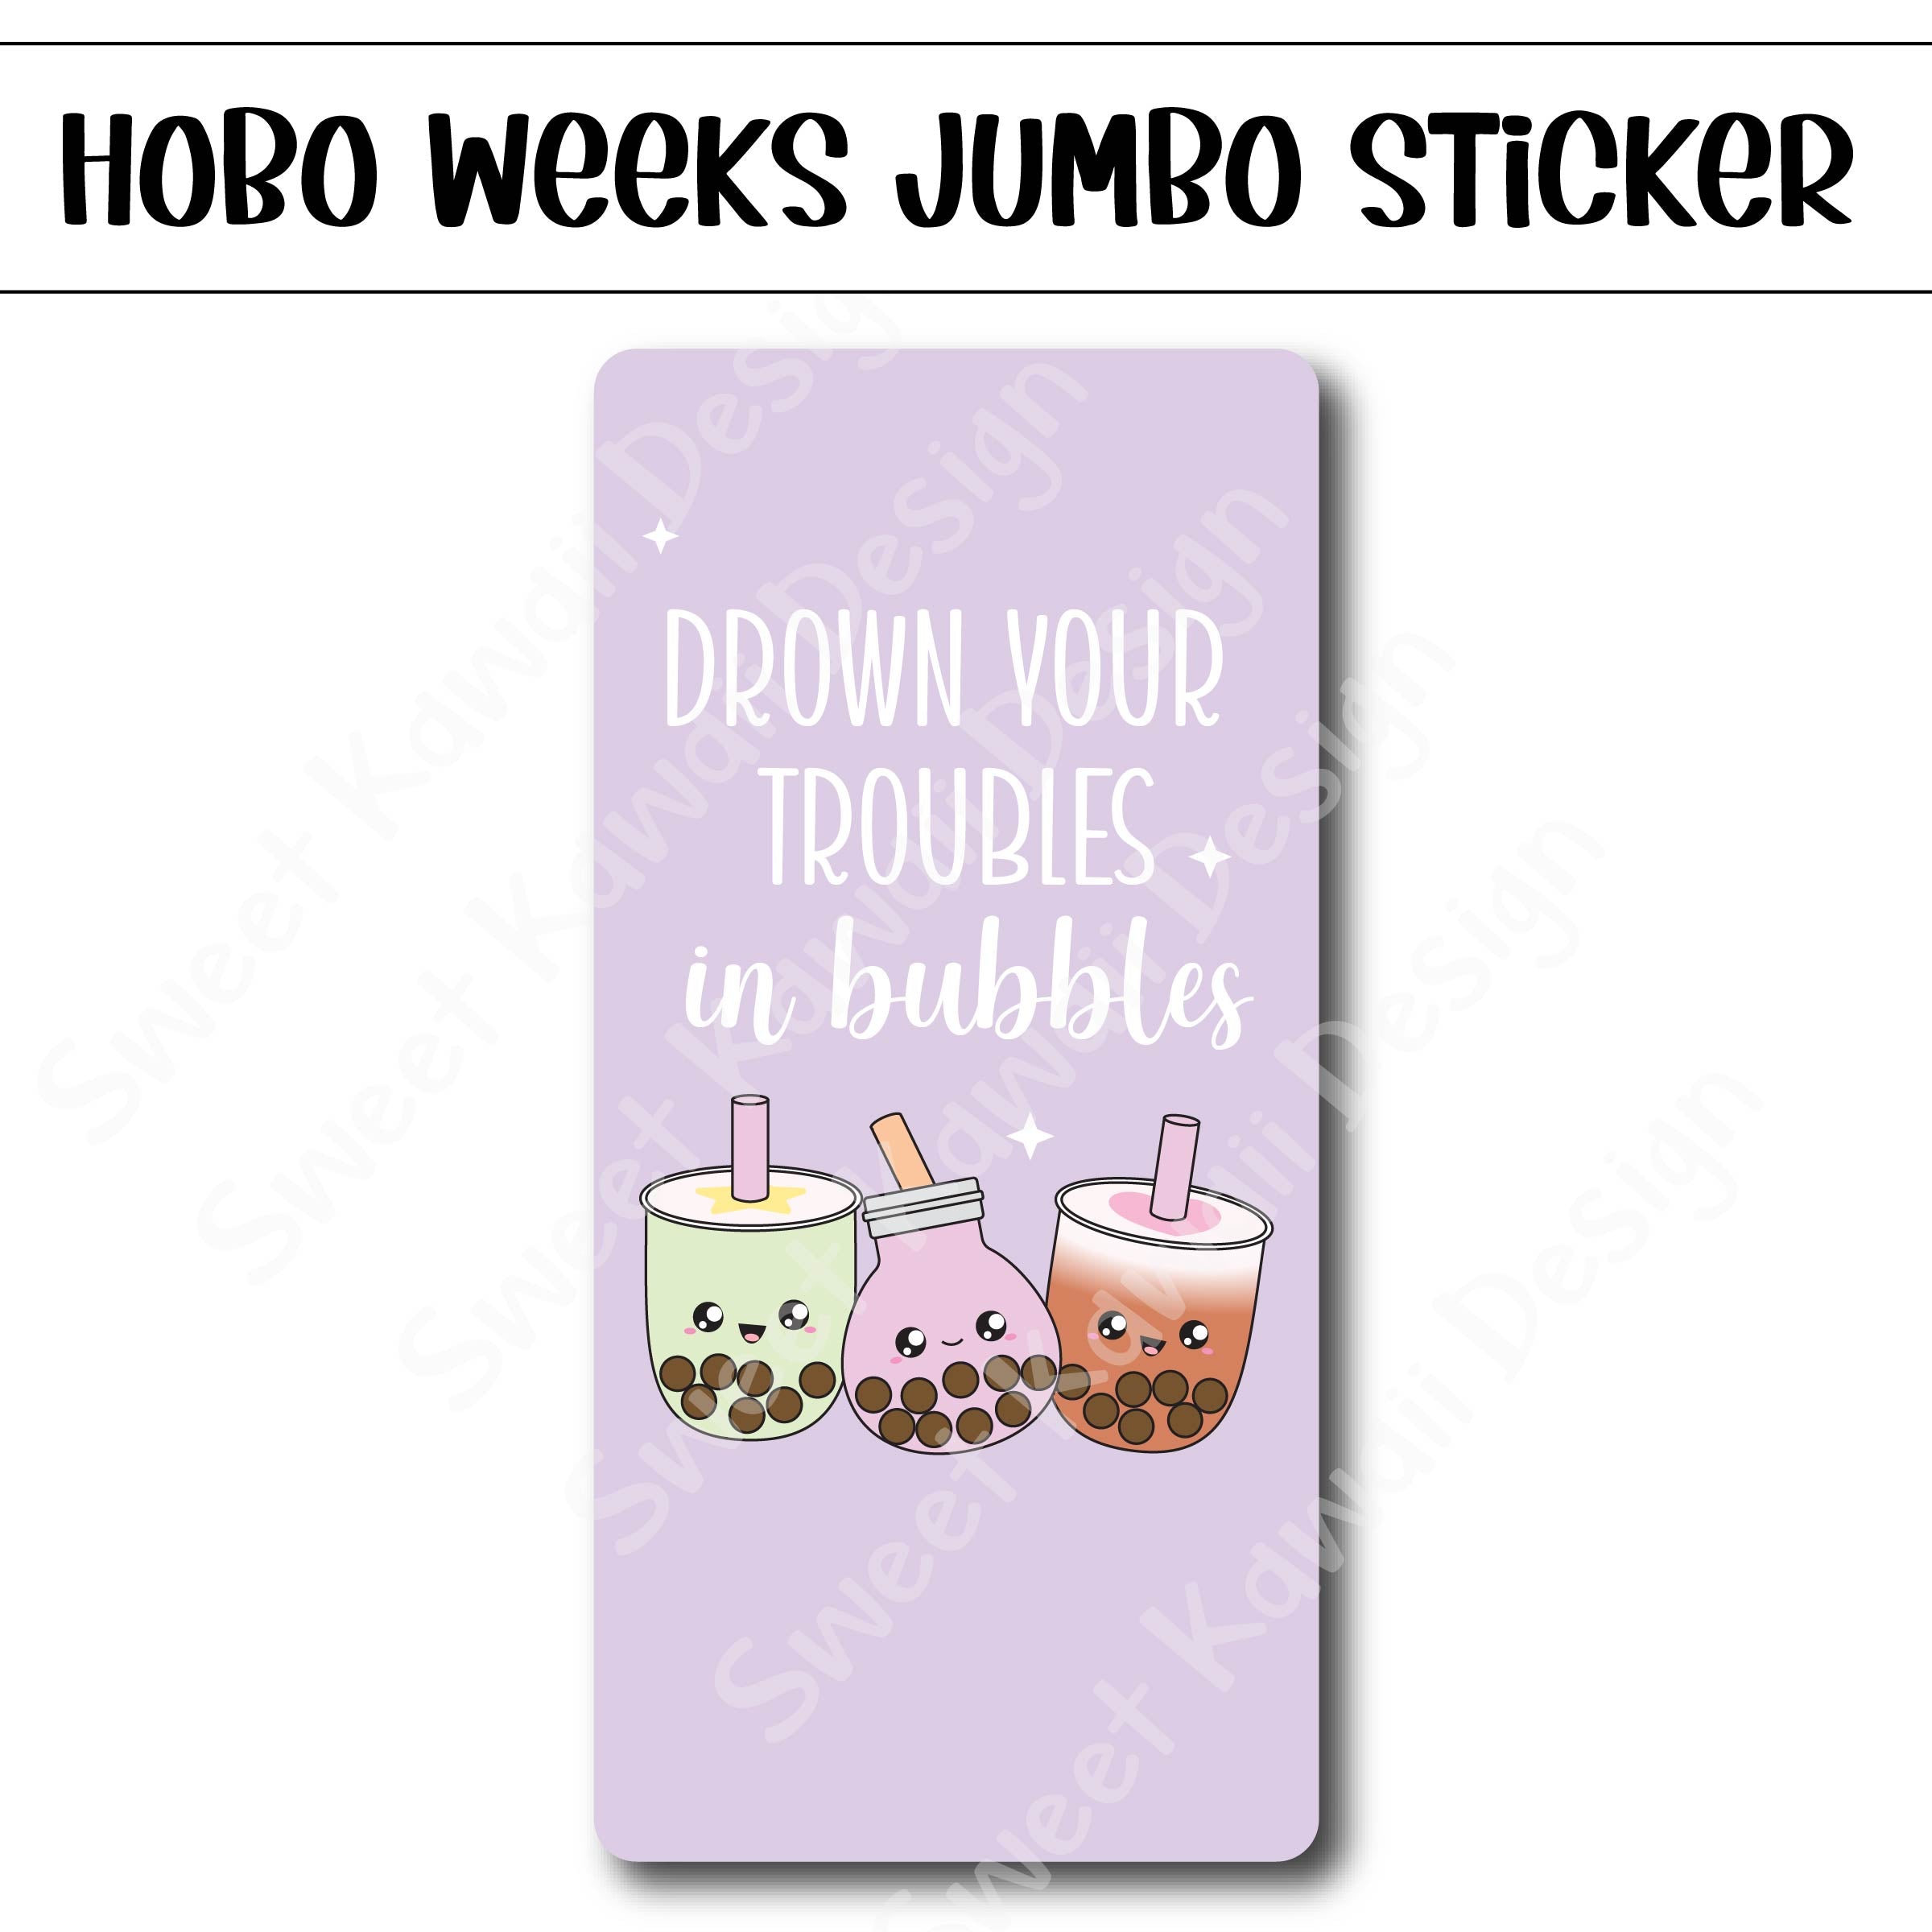 Kawaii Jumbo Sticker - Drown Your Troubles - Size Options Available